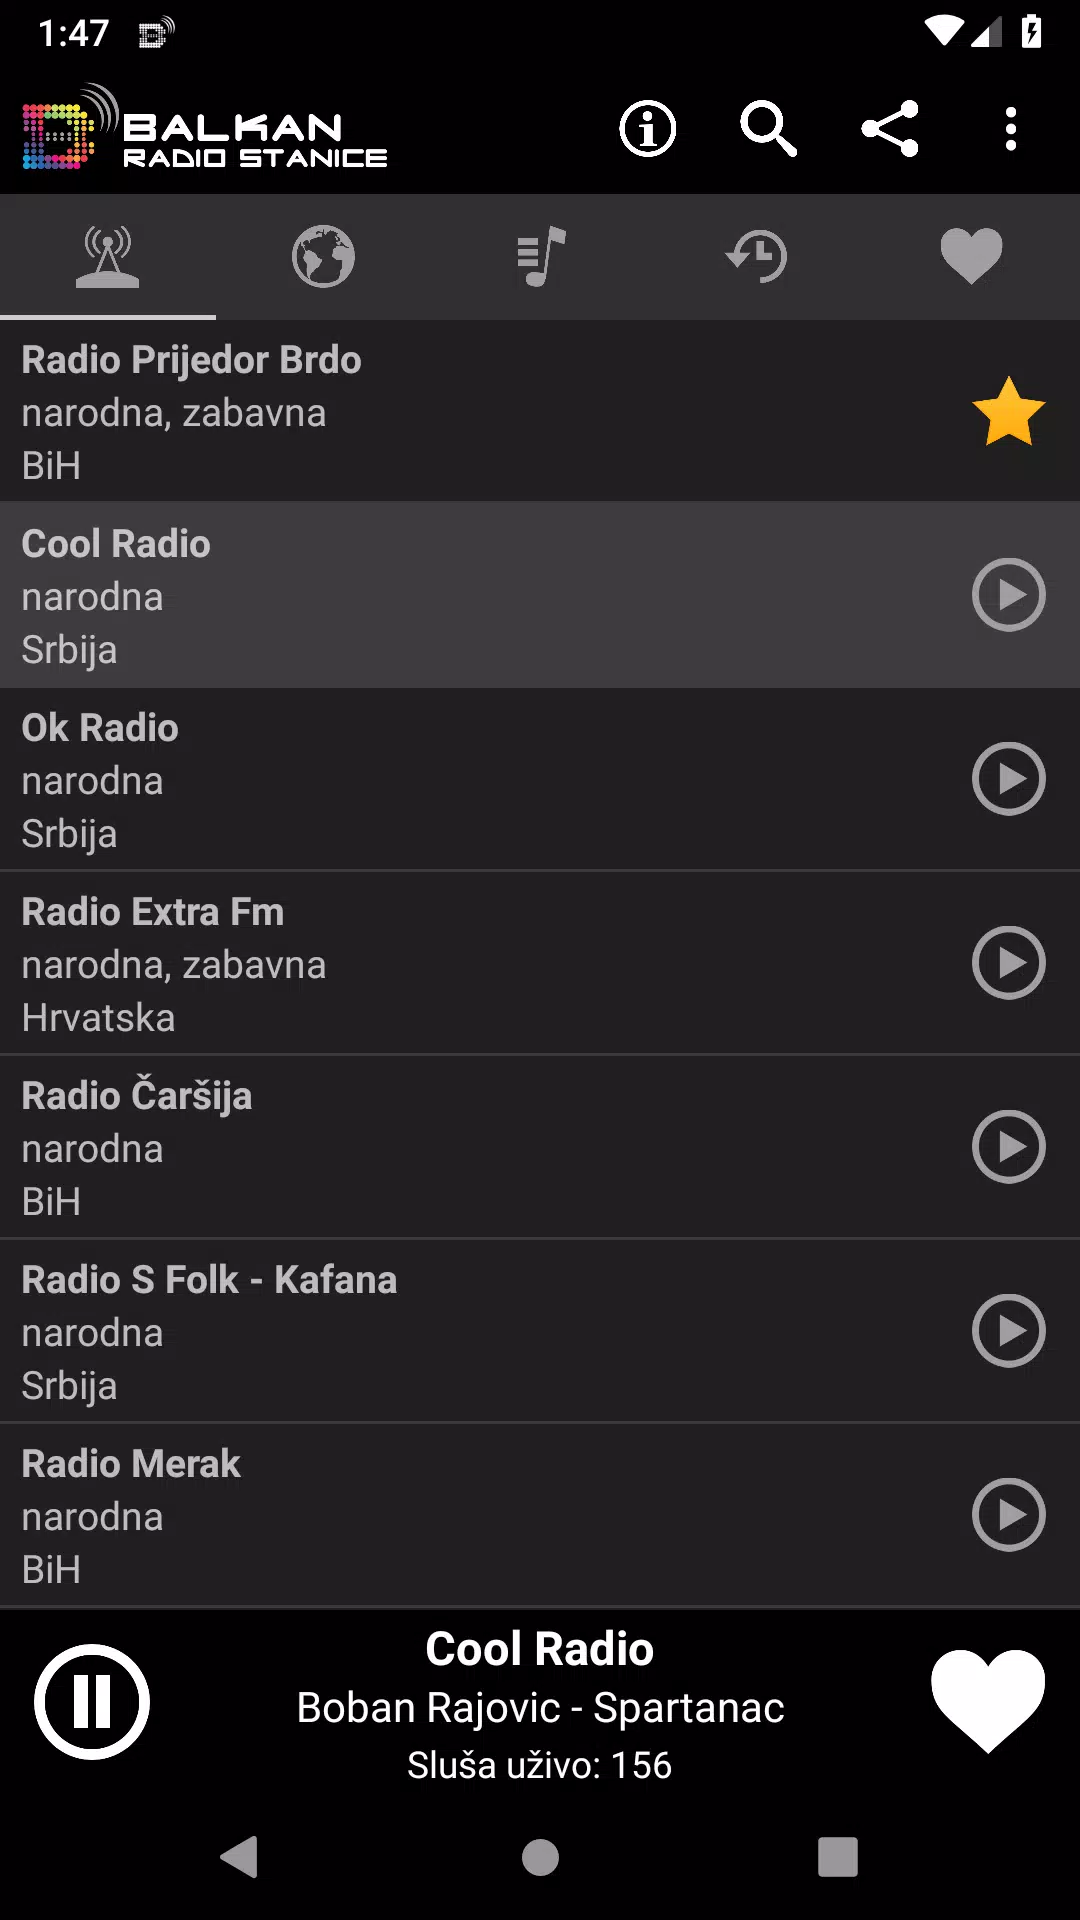 Balkan Radio Stanice for Android - APK Download